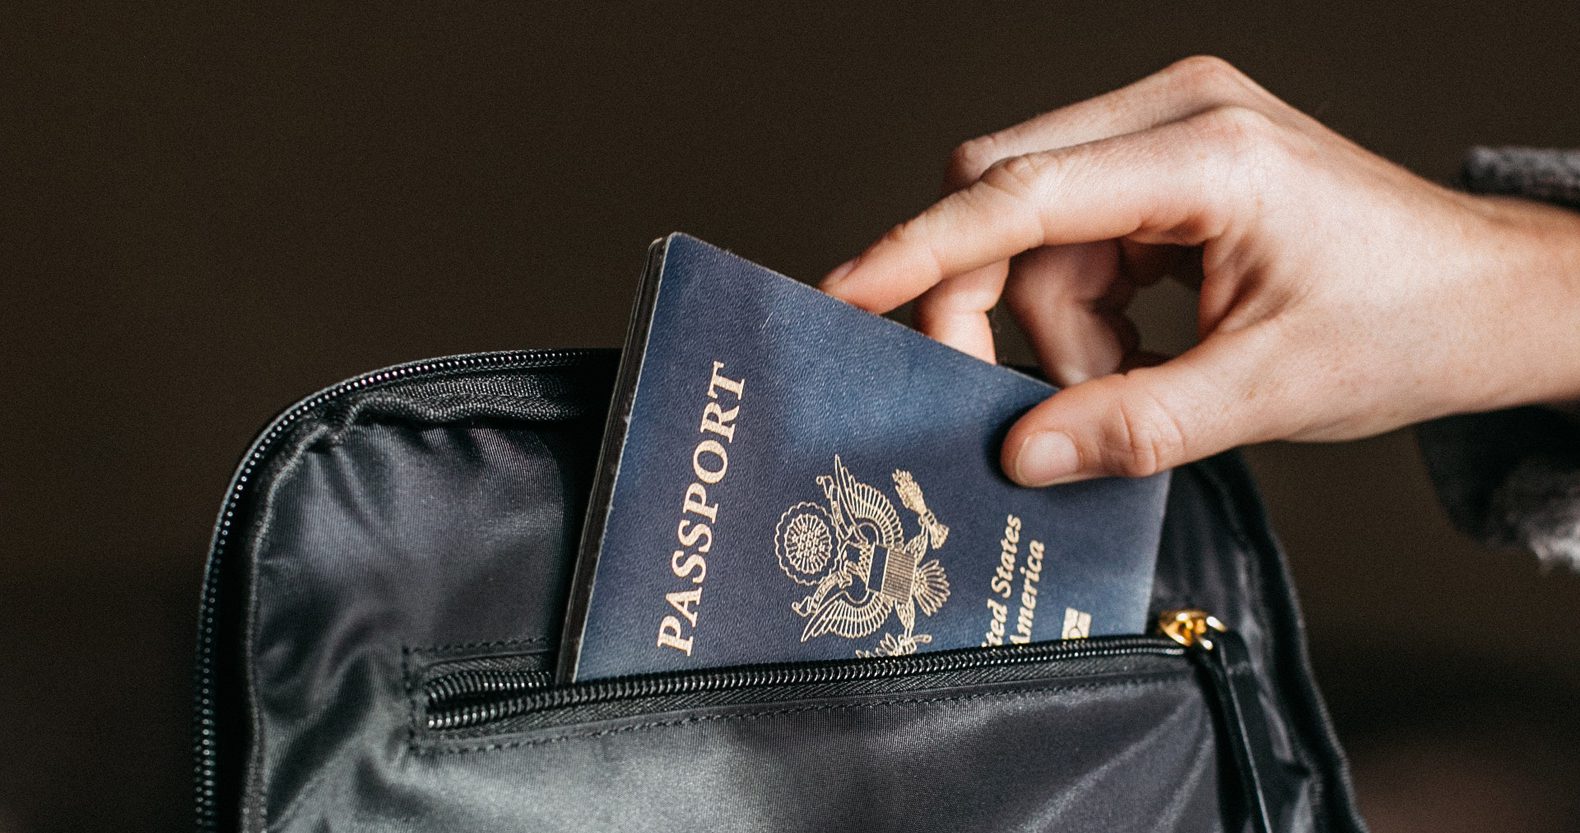 Passport safety when traveling: never hand over your passport!